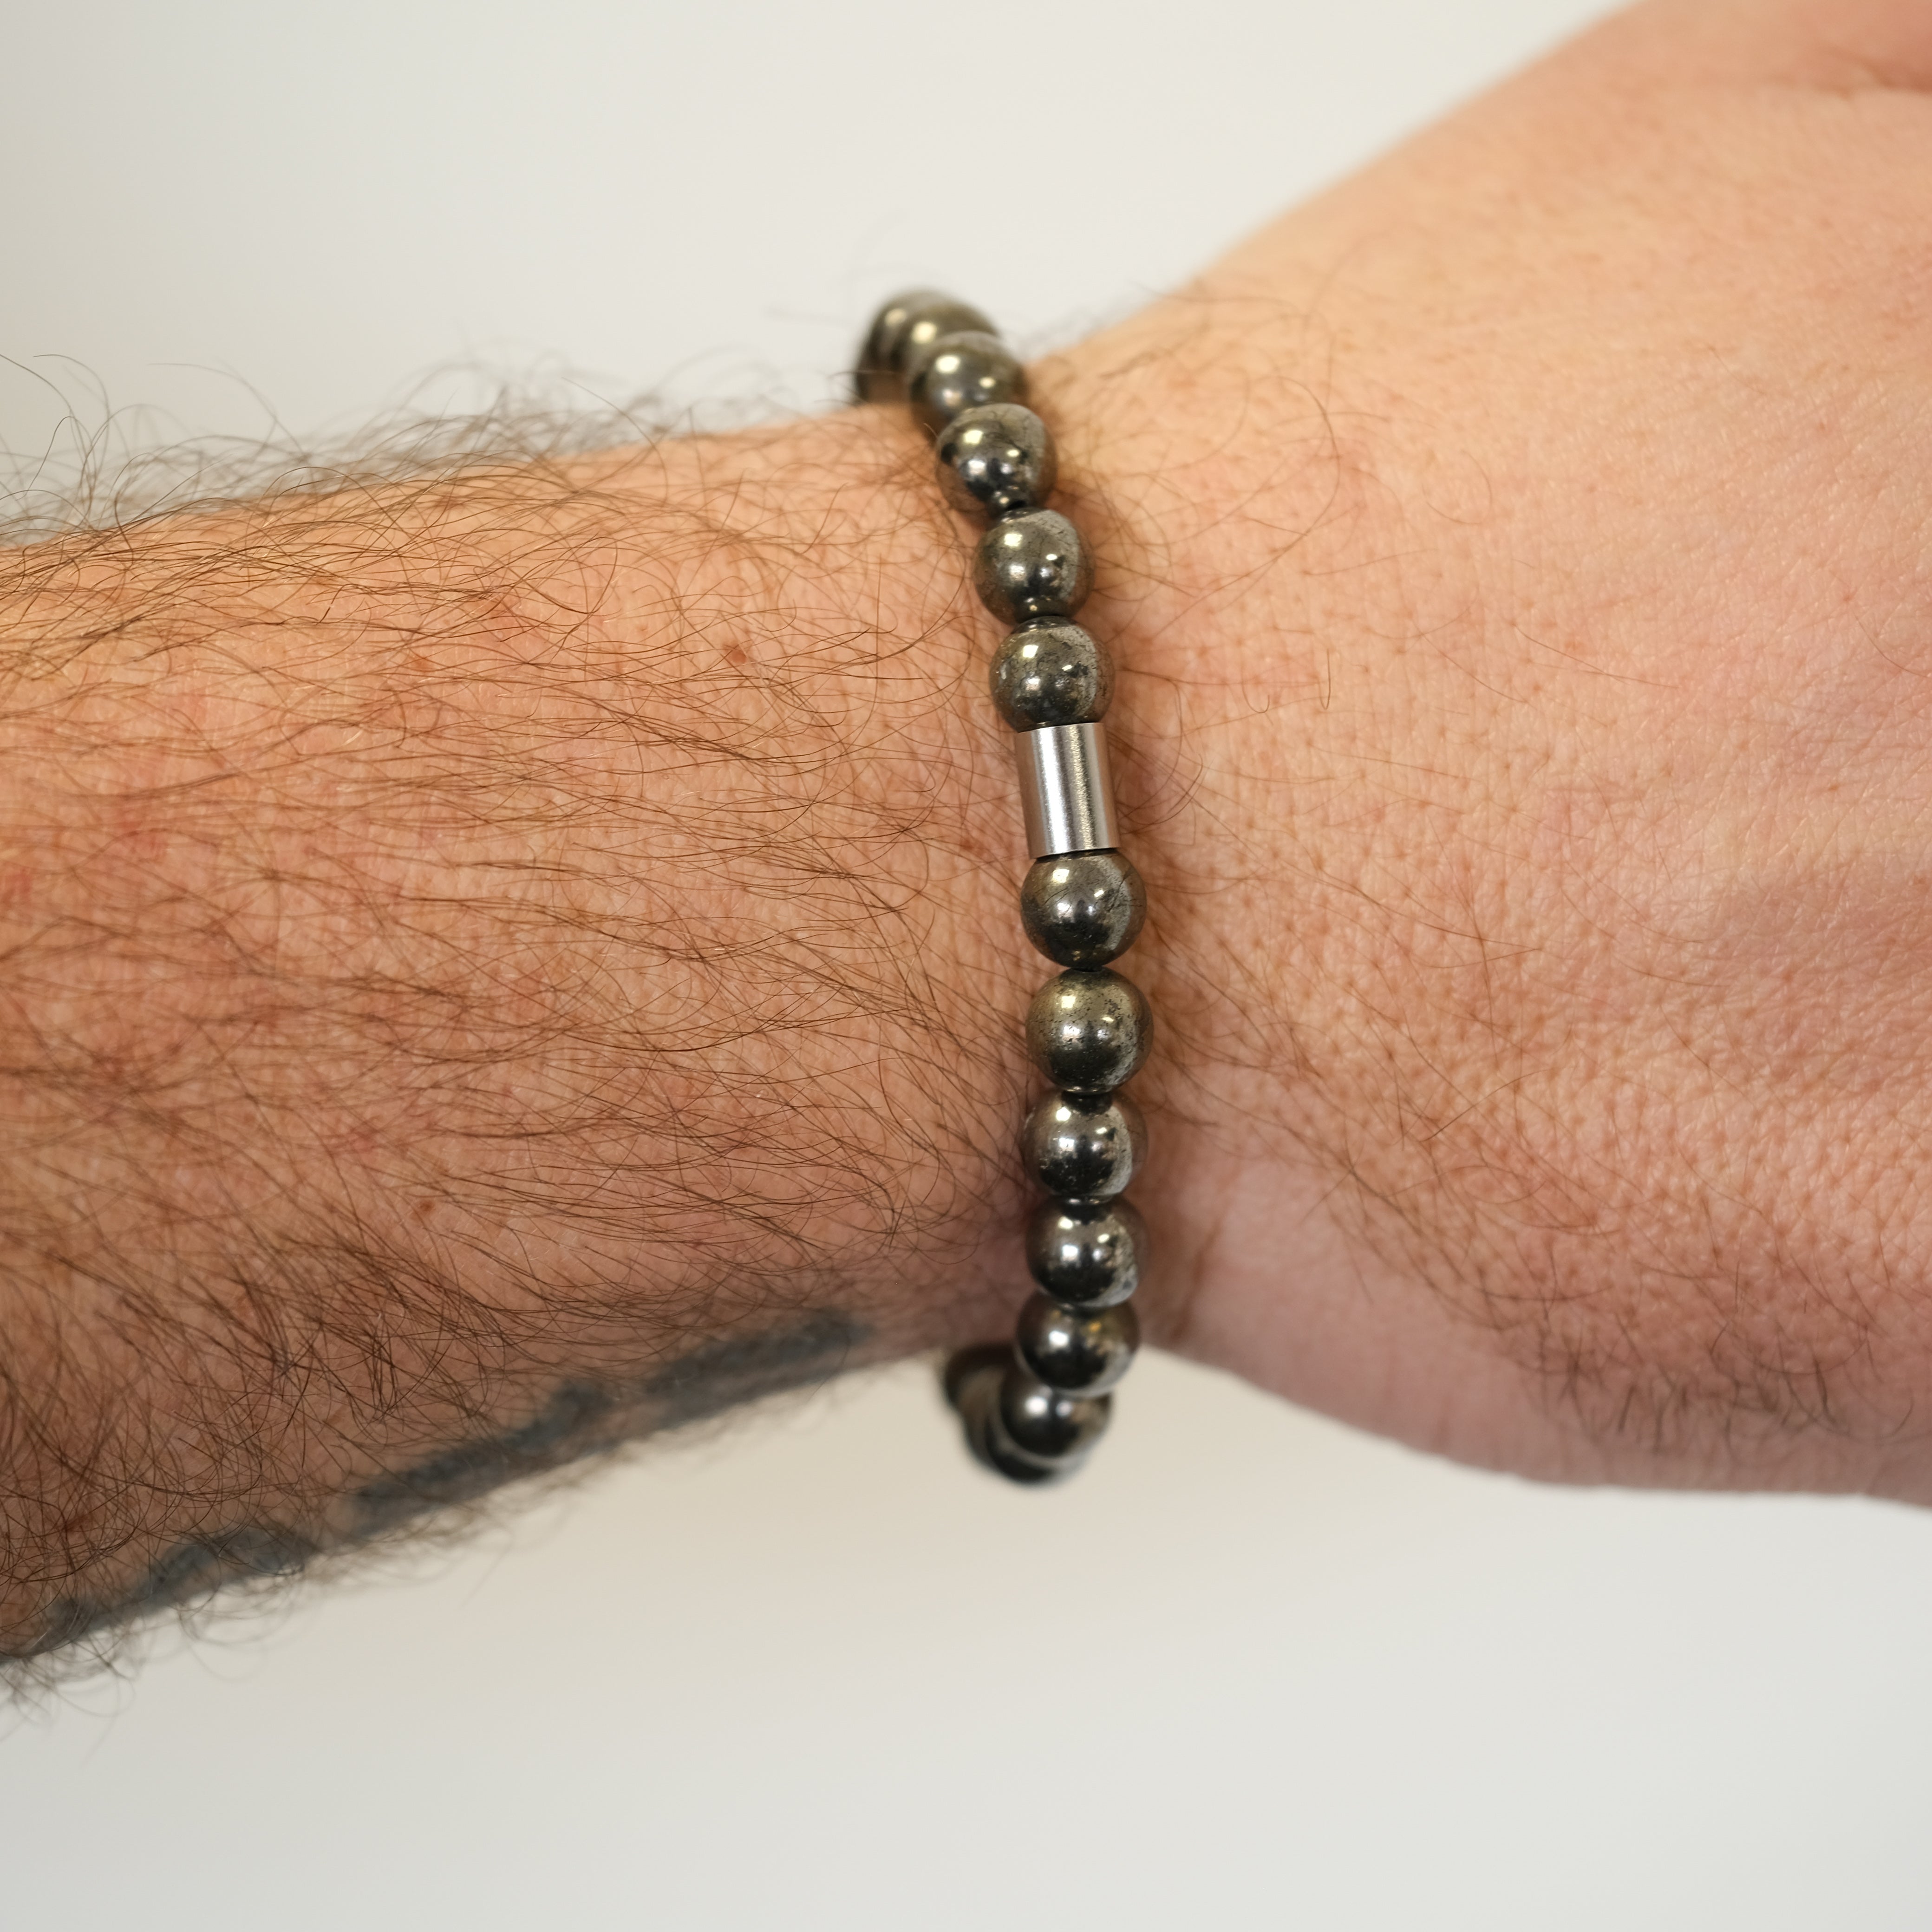 A pyrite bracelet worn on a model's wrist from behind 